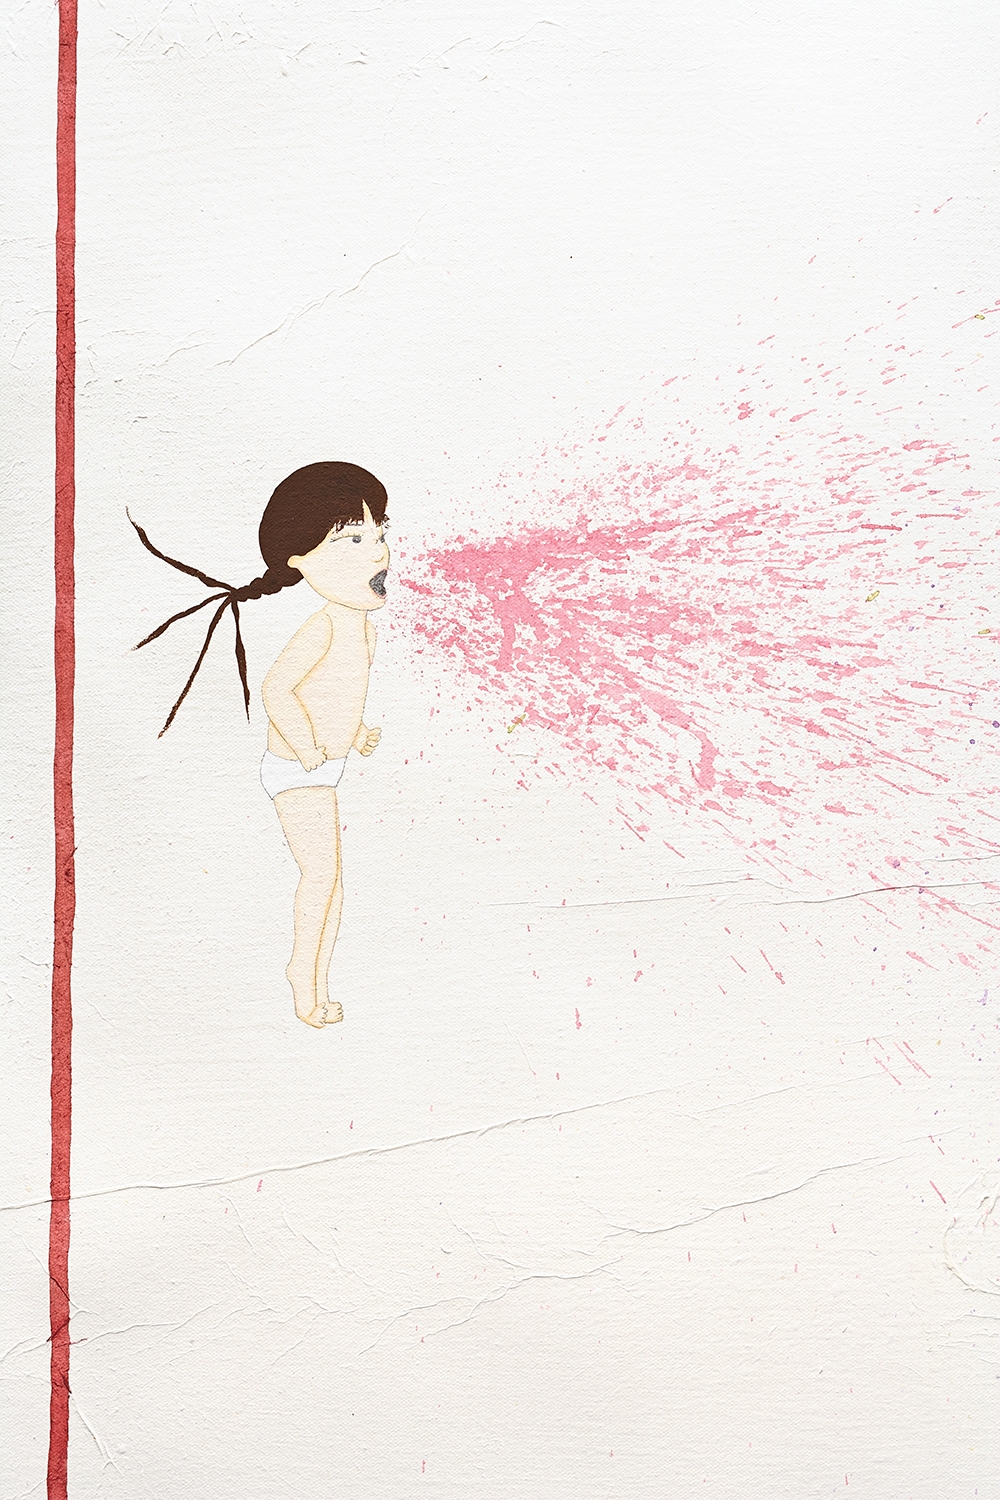 Detail of artwork by Kyung Jeon titled Red Death Fairies, 2006, Gouache, graphite, watercolor on rice paper on canvas, 35.25 x 53.25 inches, 89.5 x 135.3 cm